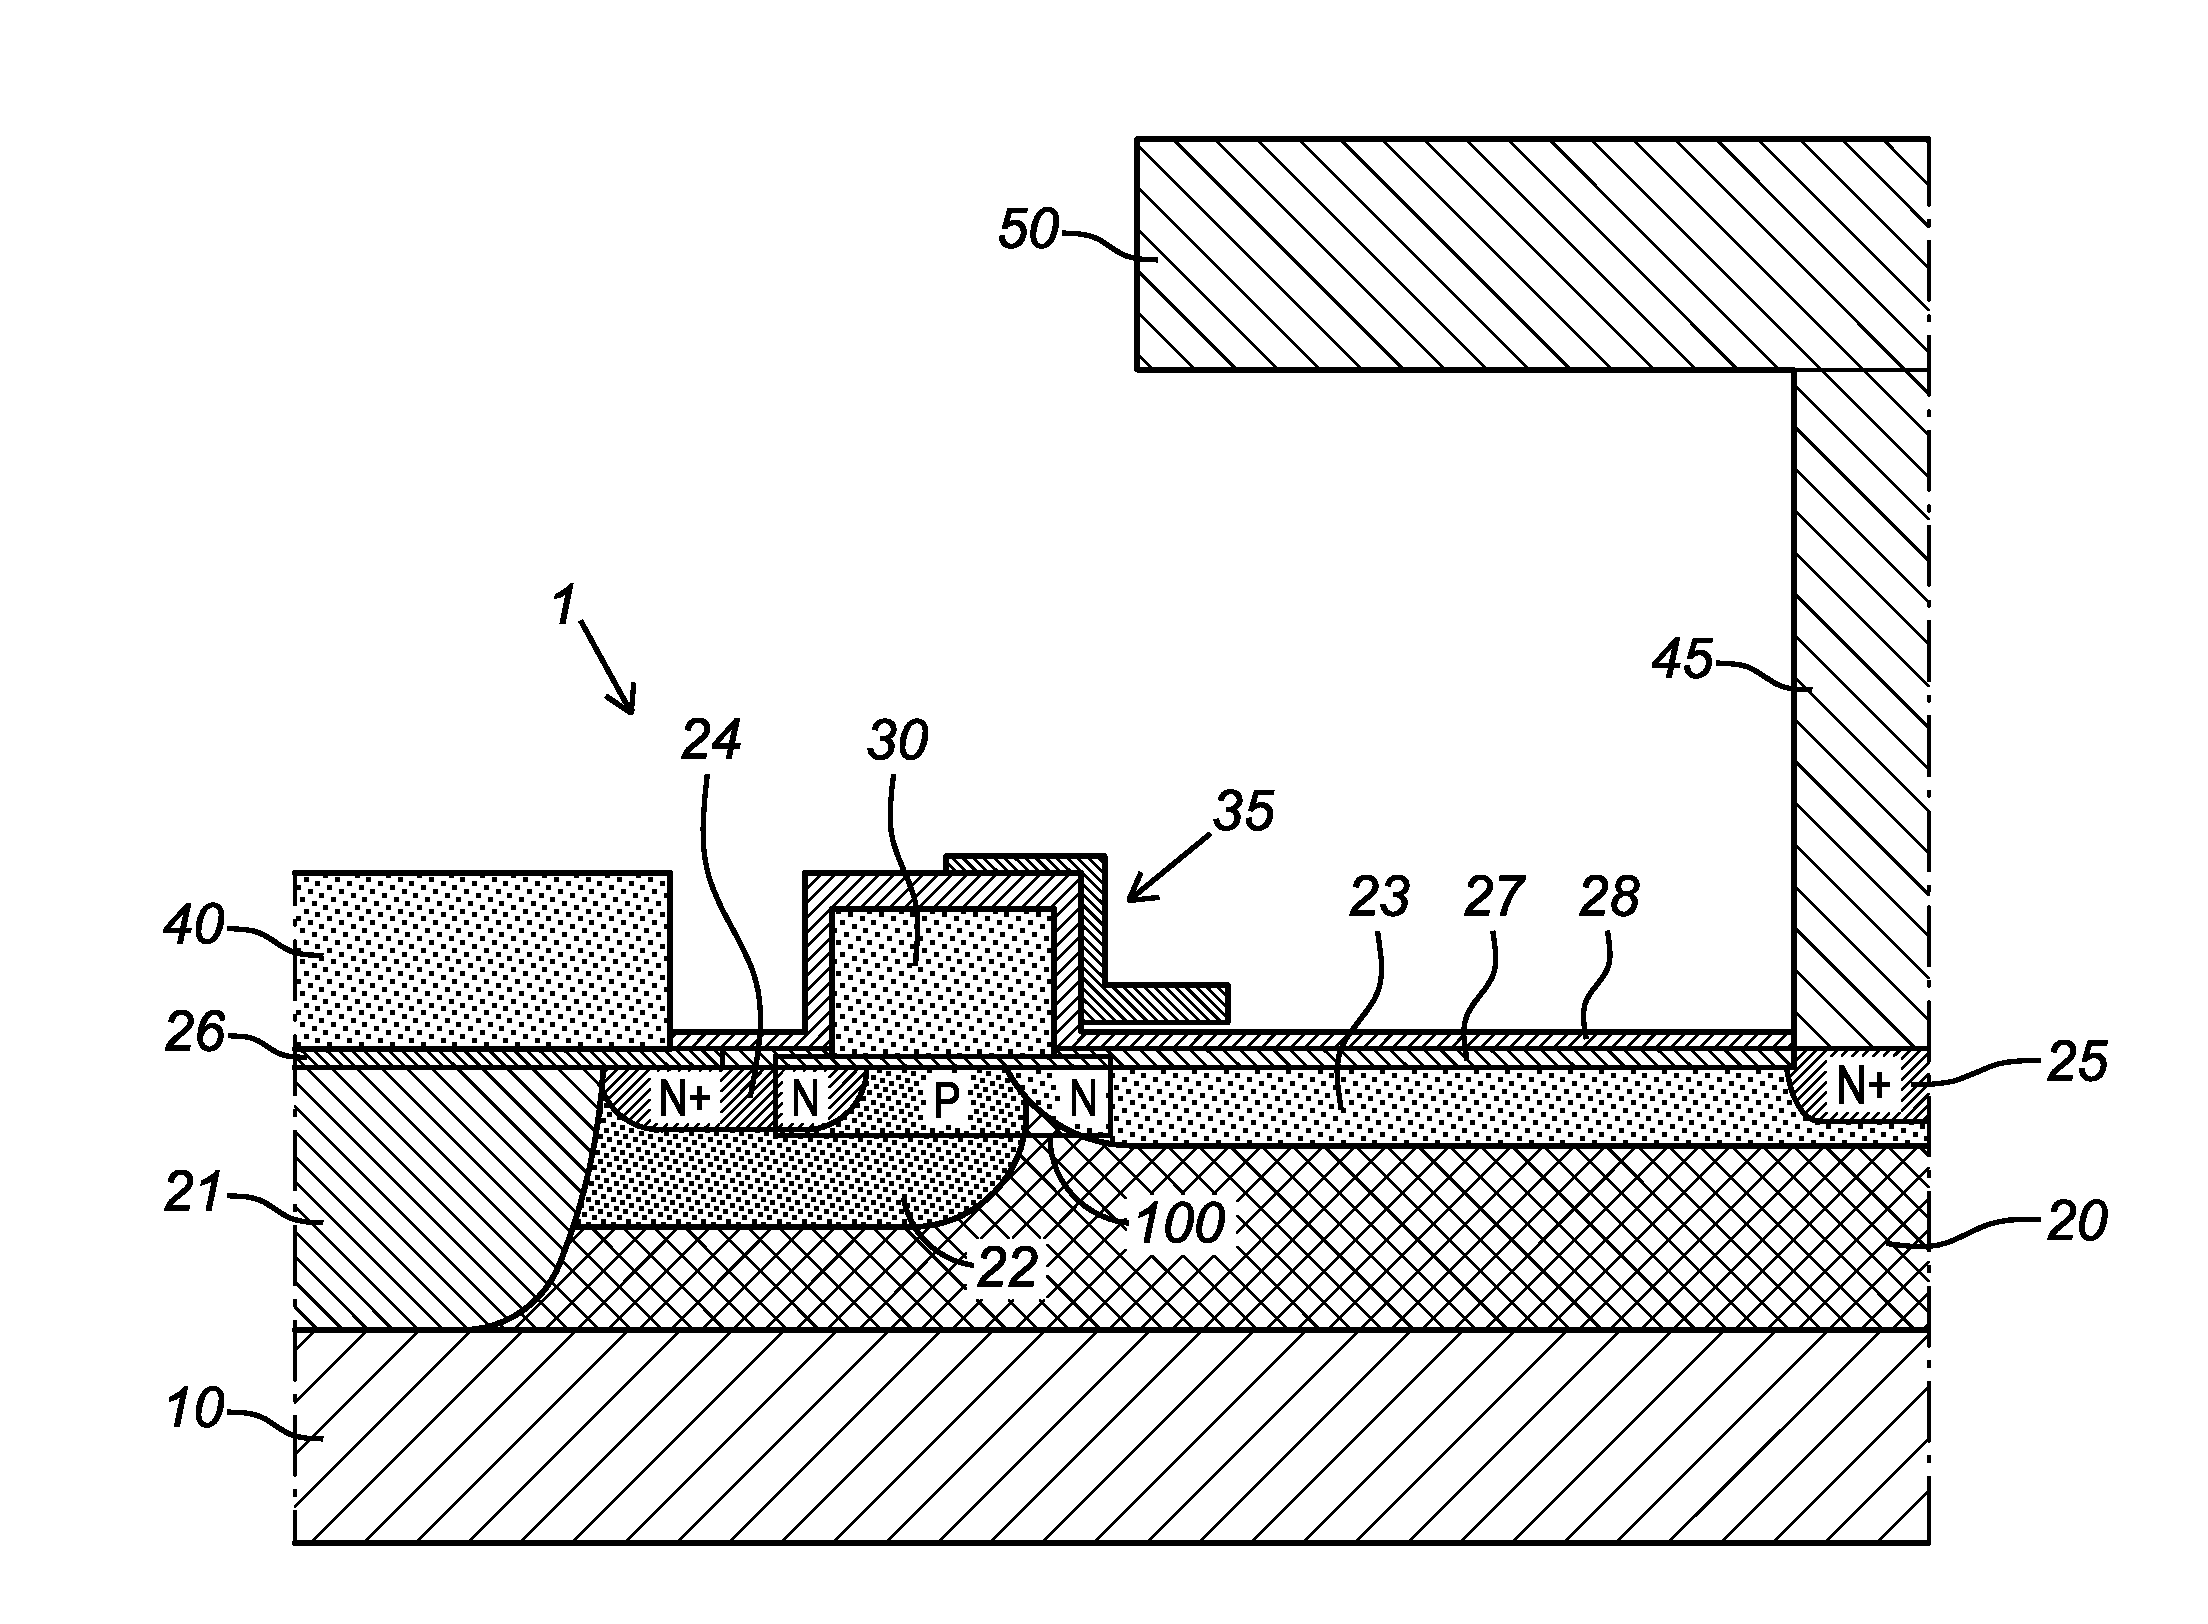 Electronic device comprising rf-ldmos transistor having improved ruggedness